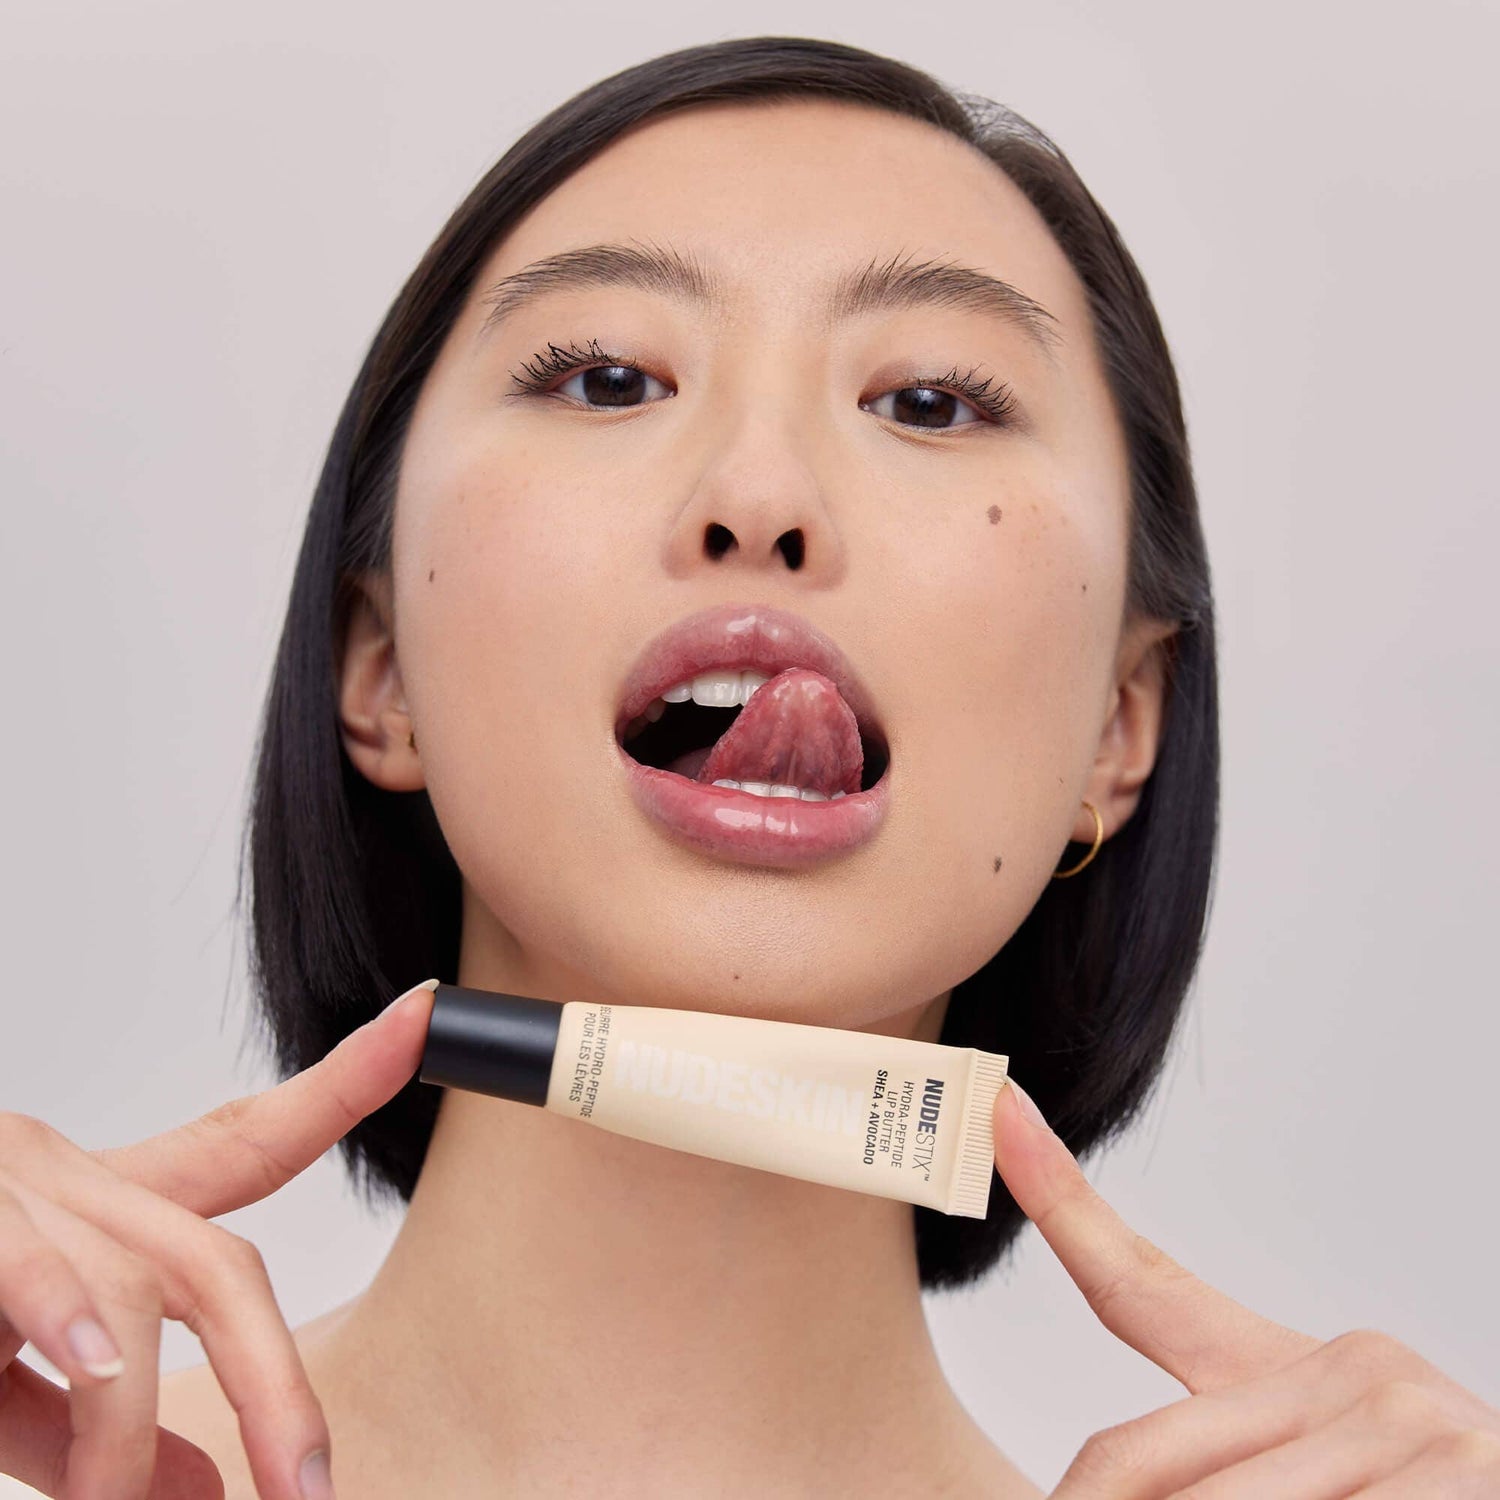 Asian young woman holding a tube of Hydra-Peptide Lip Butter Clear Gloss